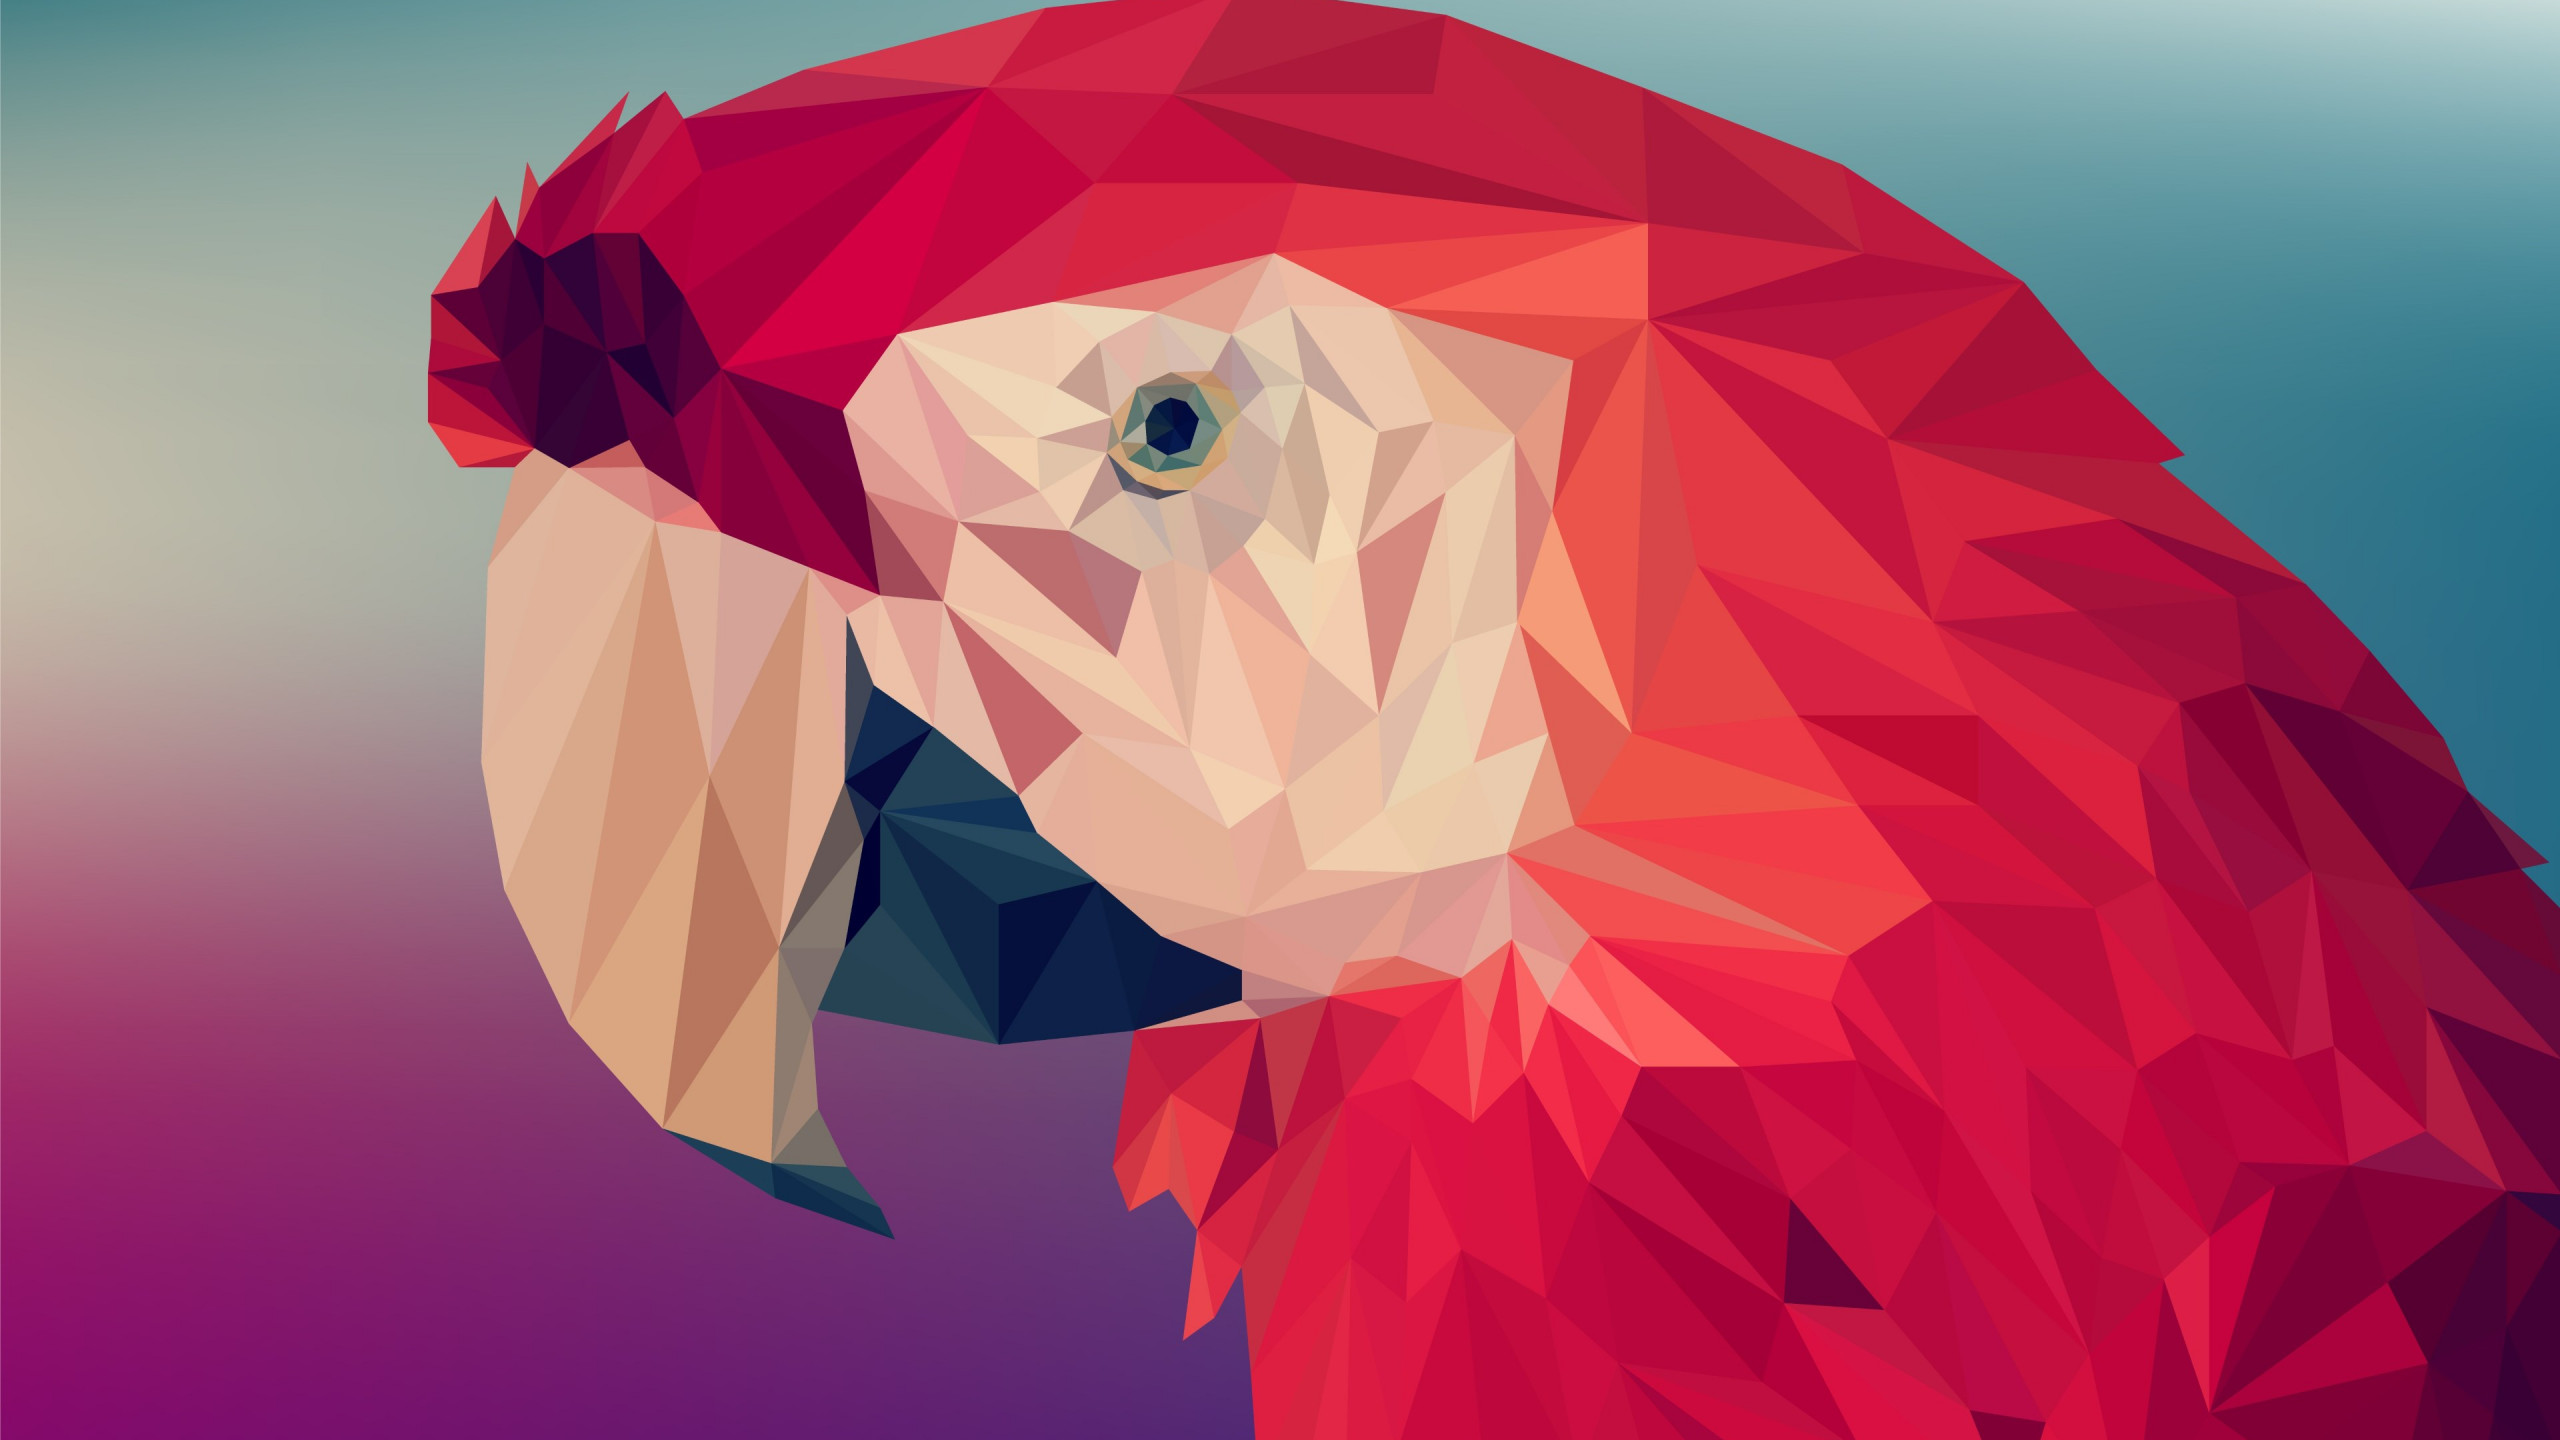 Low poly art: Red parrot wallpaper 2560x1440